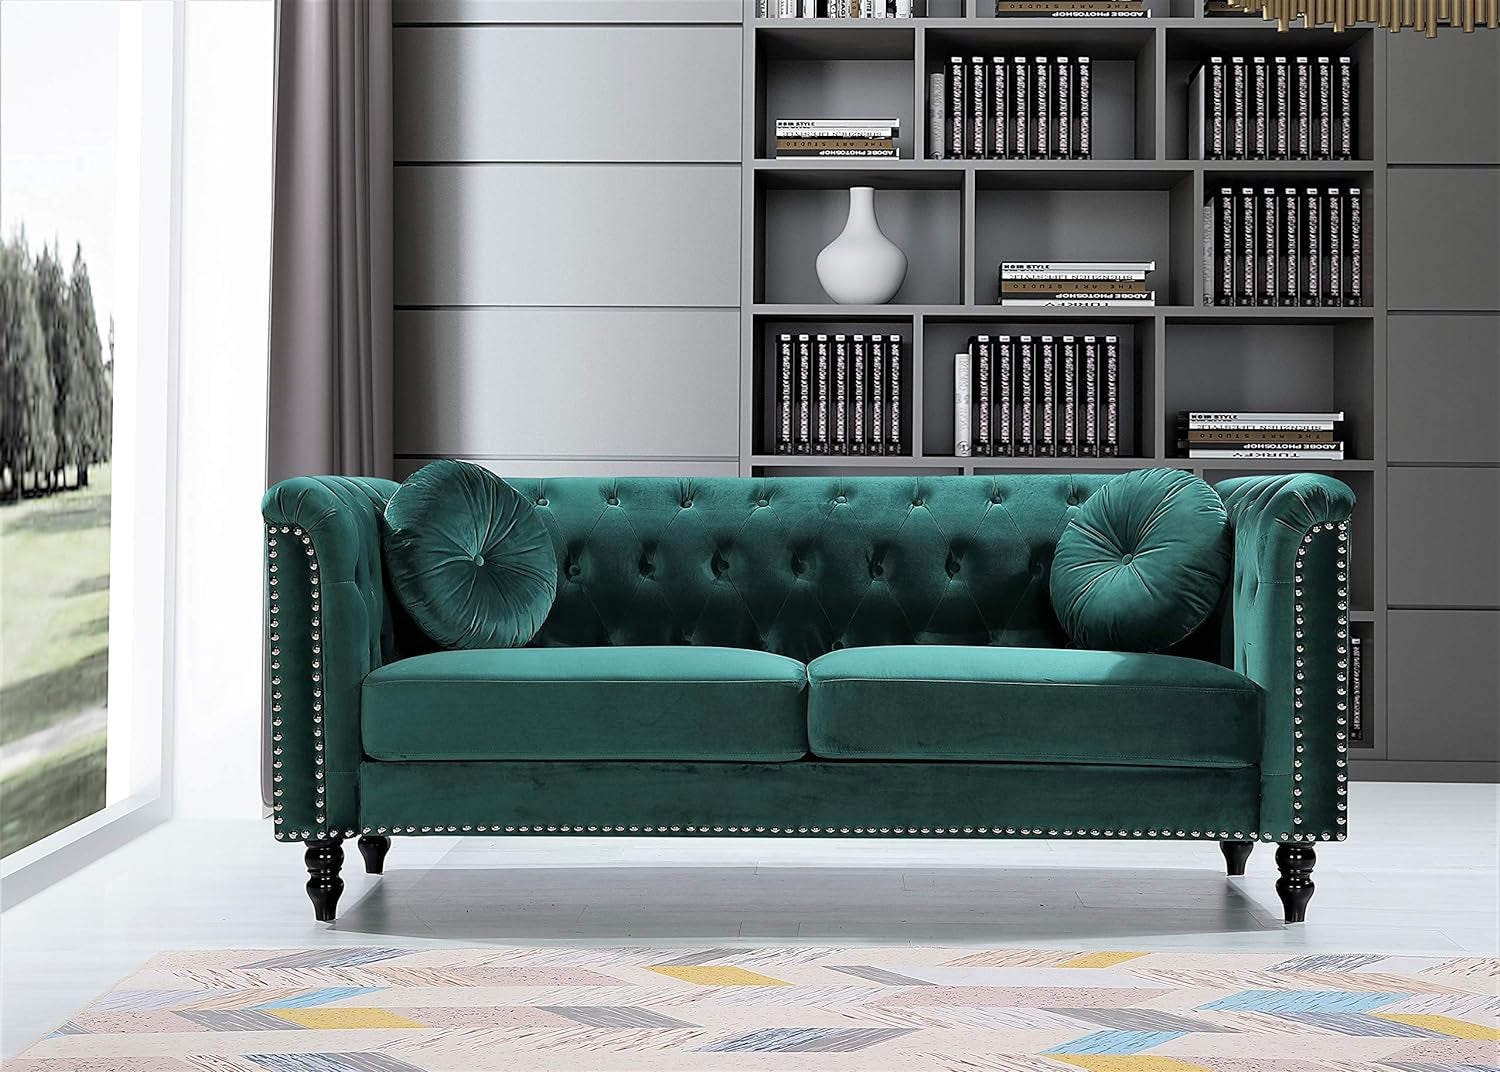 Kittleson Velvet Chesterfield Sofa for Living Room, Apartment or Office, Mid Century Modern Couch with Diamond Tufts and Nailhead Accent, 75.98", Lush Green